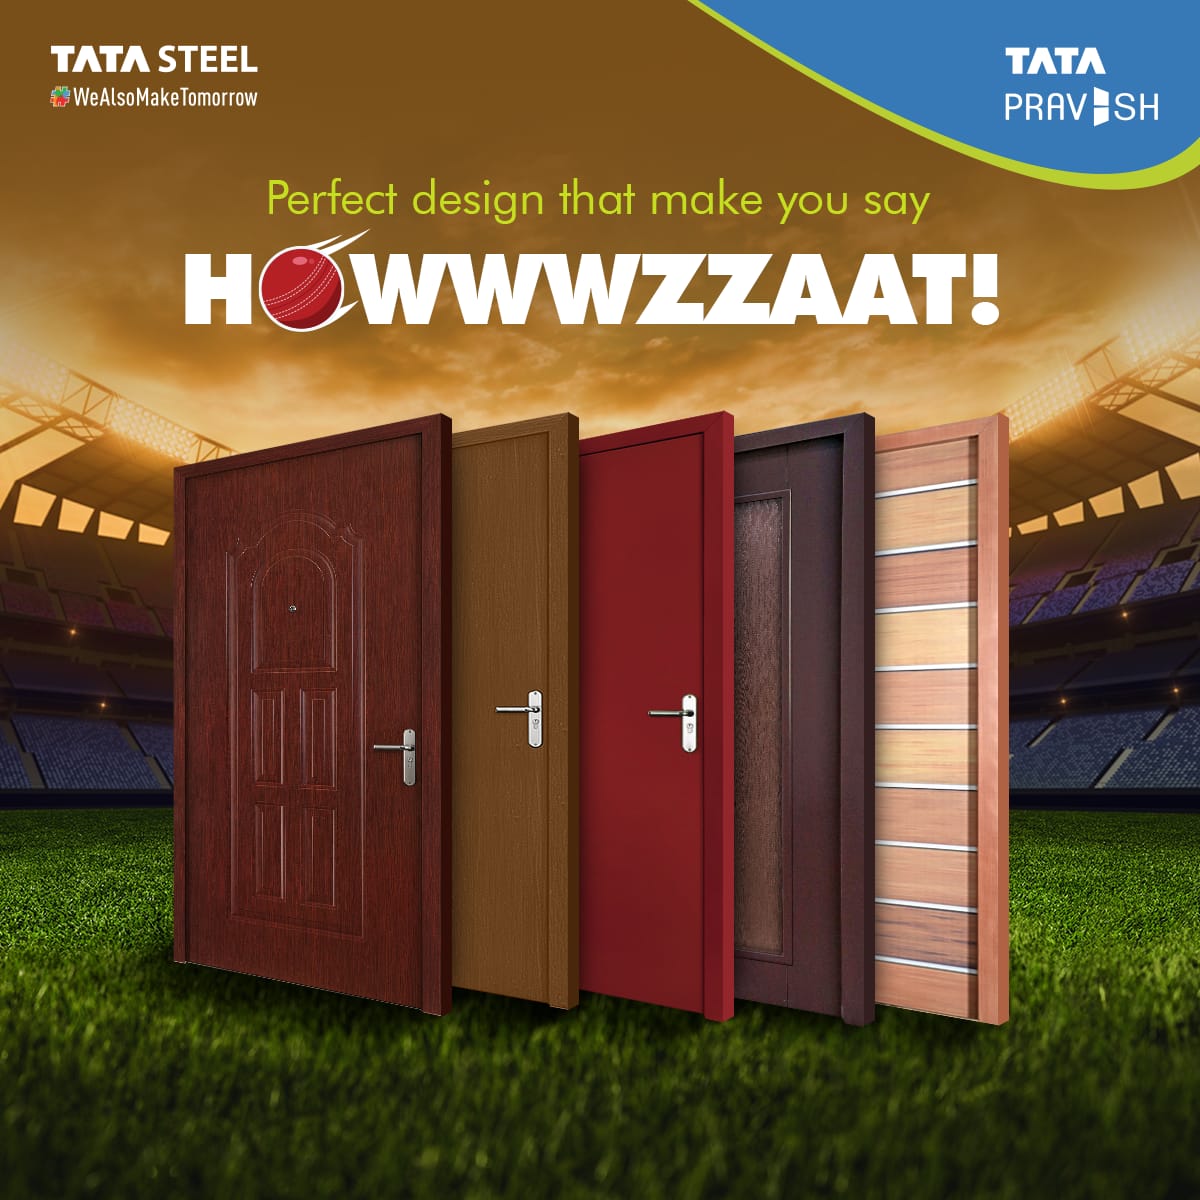 With perfect design and unbeatable strength, Tata Pravesh is your winning choice for home security. Elevate your game with doors and windows that make every match at home a victory!
.
.
#TataPravesh #AkelaHiKaafiHai #HomeSecurity #Howzzat #Safety #TataPraveshDoors #AHKH #Perfect